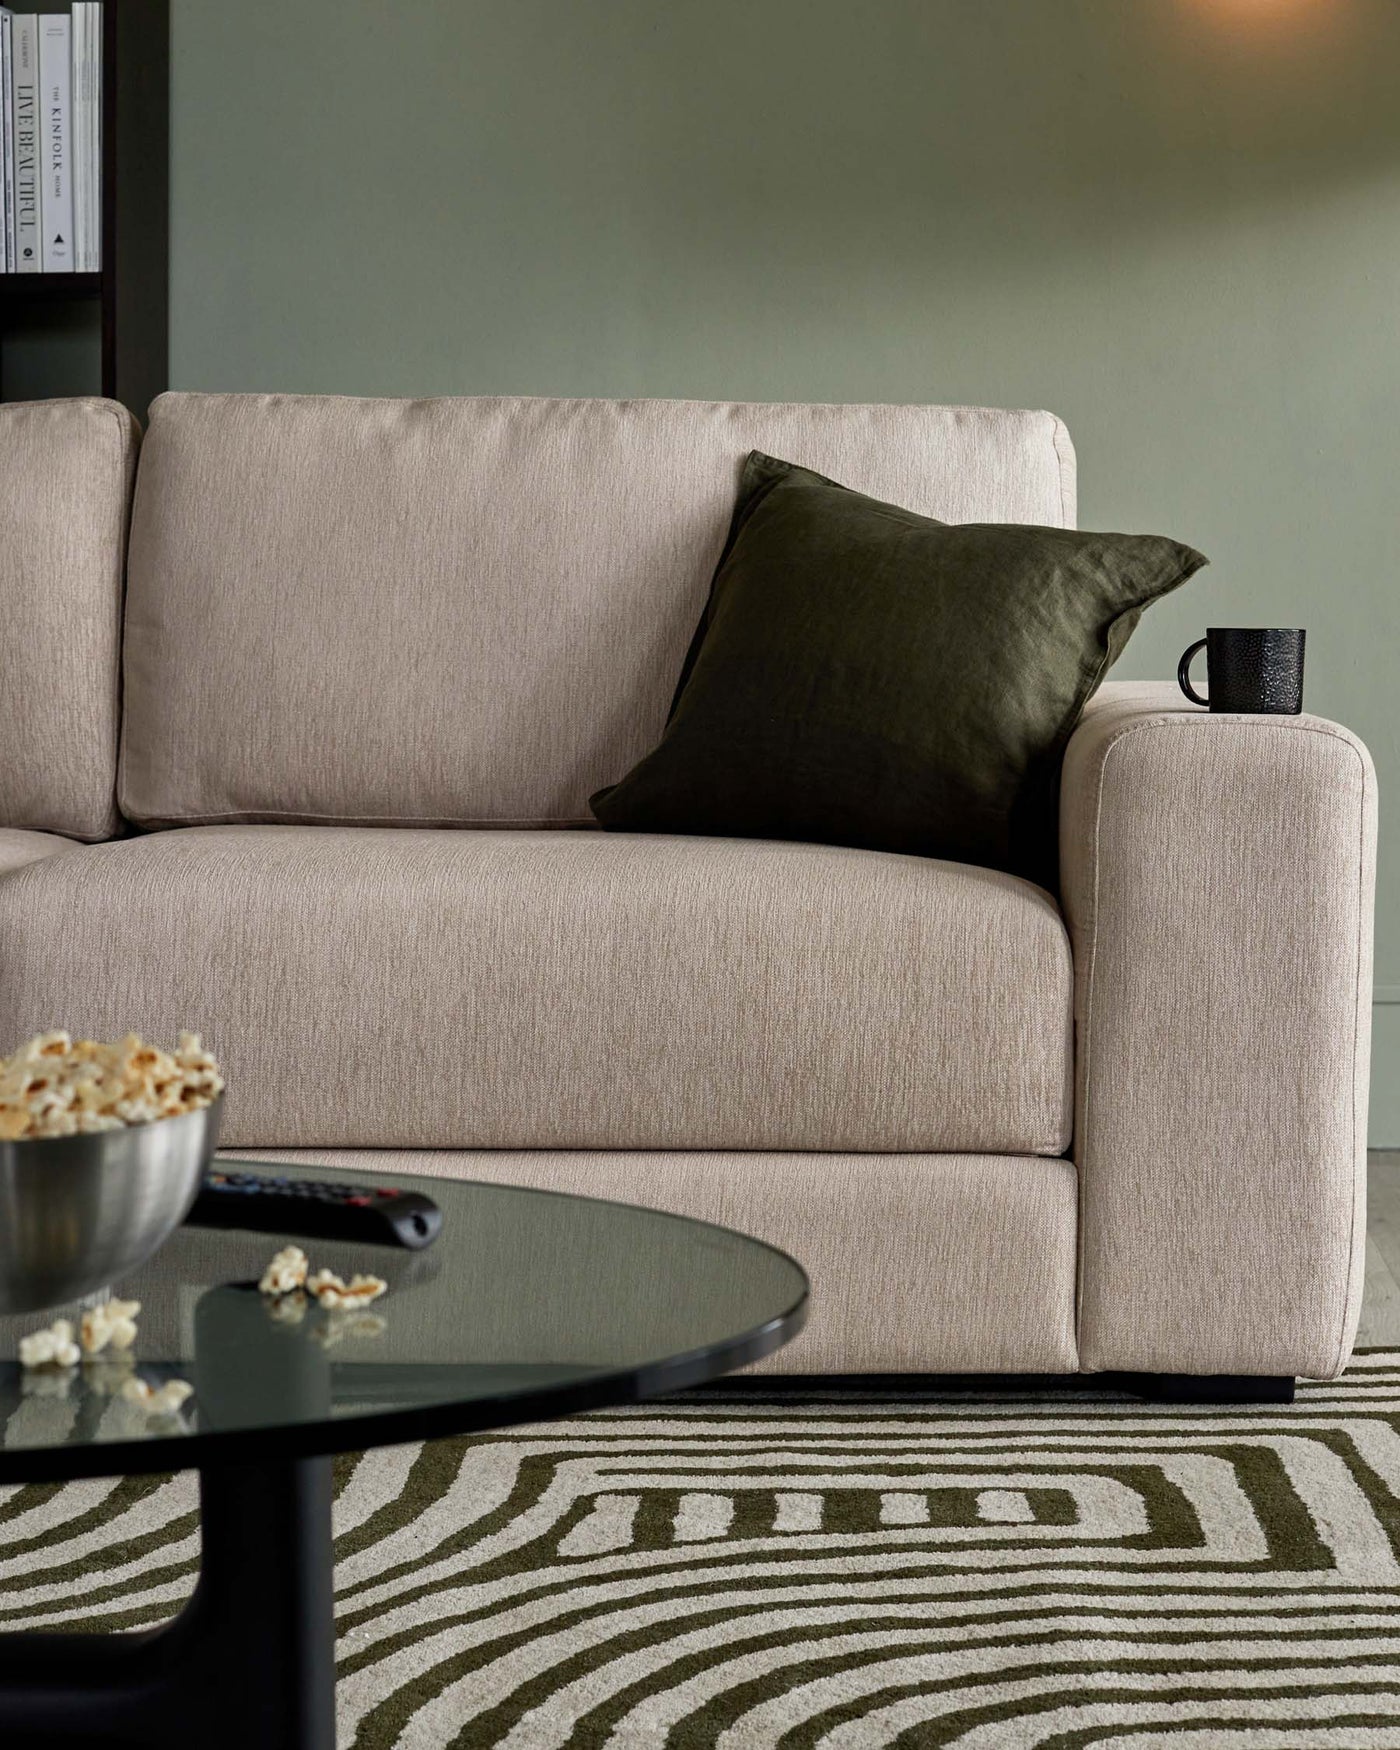 Beige fabric upholstered three-seater sofa with clean lines and a plush backrest. Includes a dark green throw pillow and a rounded armrest with an integrated cup holder. In front of the sofa, a low-profile, round, black coffee table on a patterned area rug.